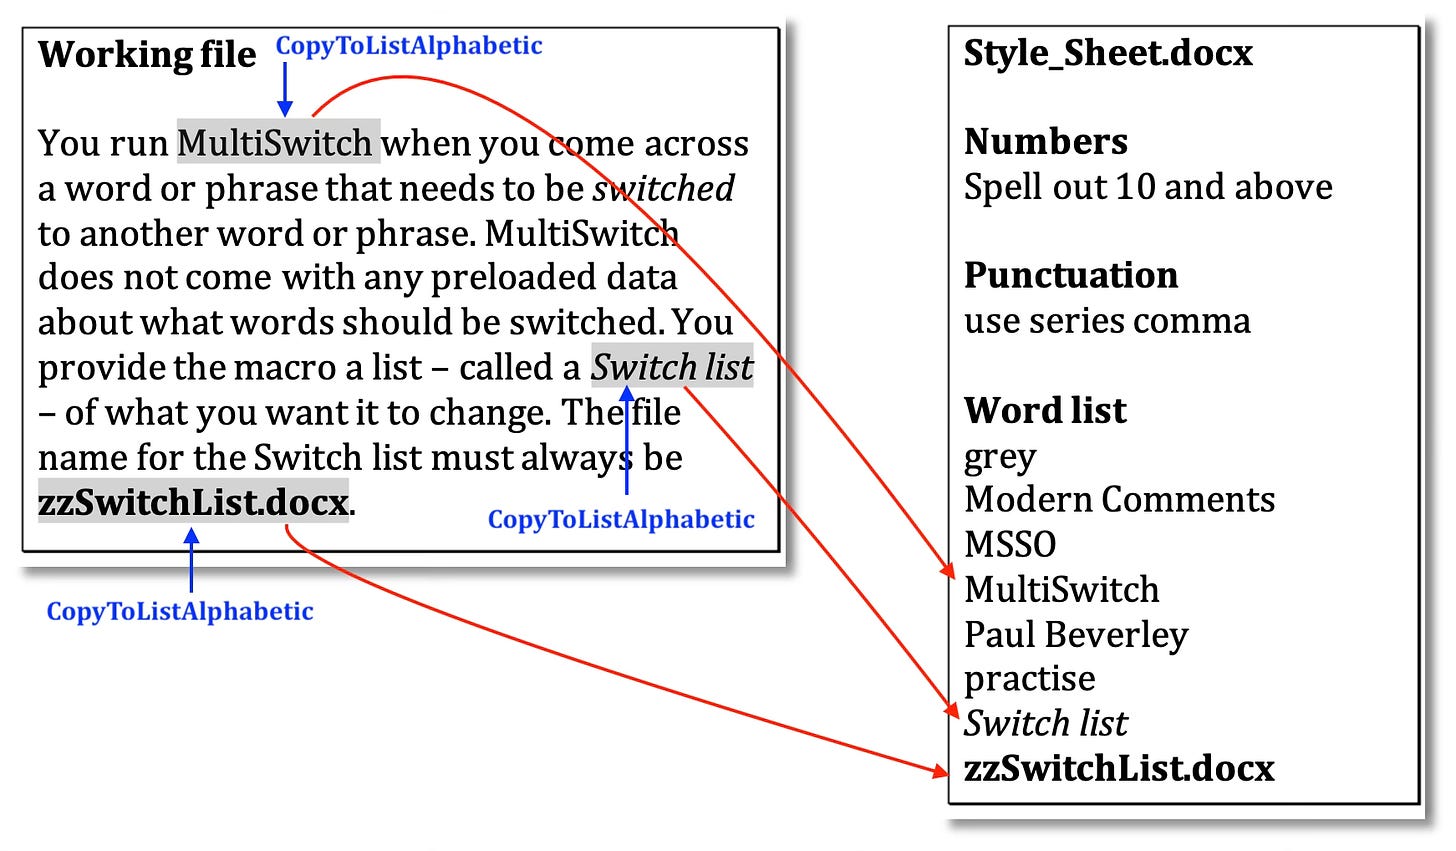 Shows the CopyToListAlphabetic adding words from a working document to a style sheet, placing them in alphabetical order in the word list section